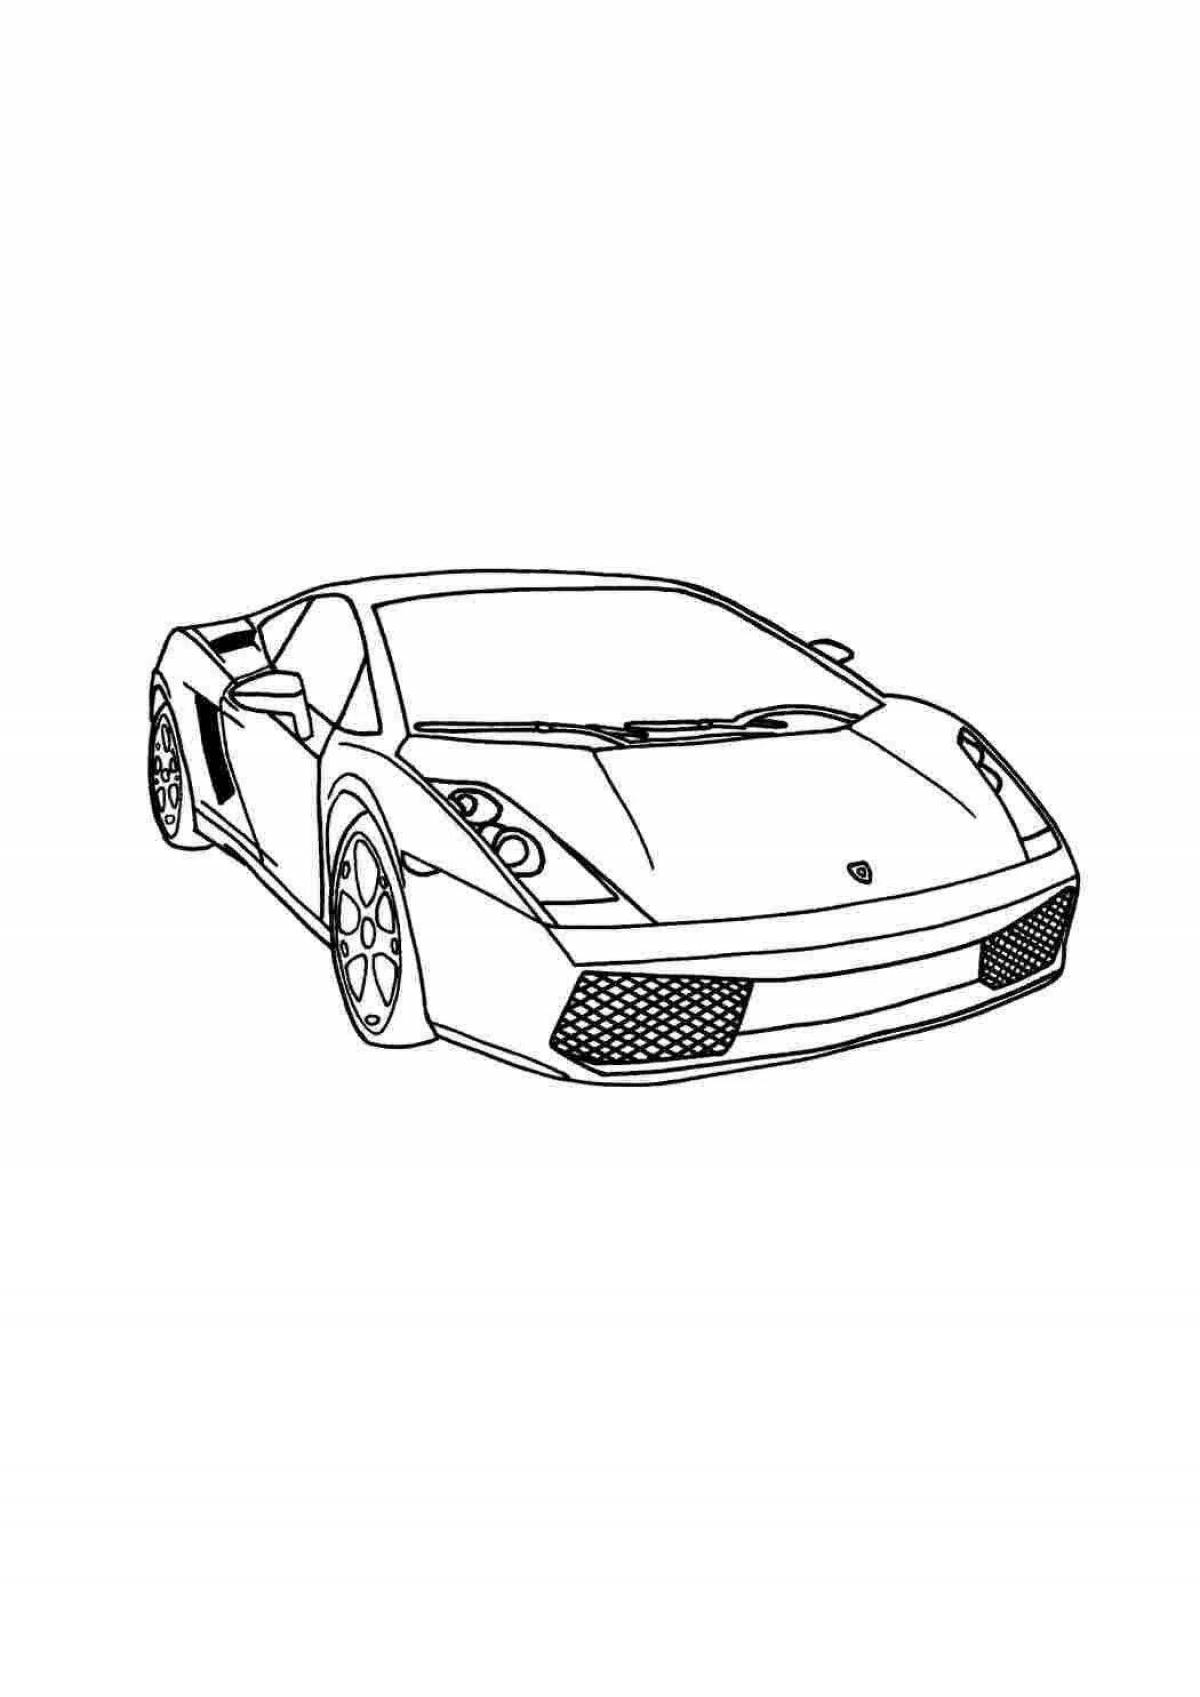 Coloring bright sports car for boys